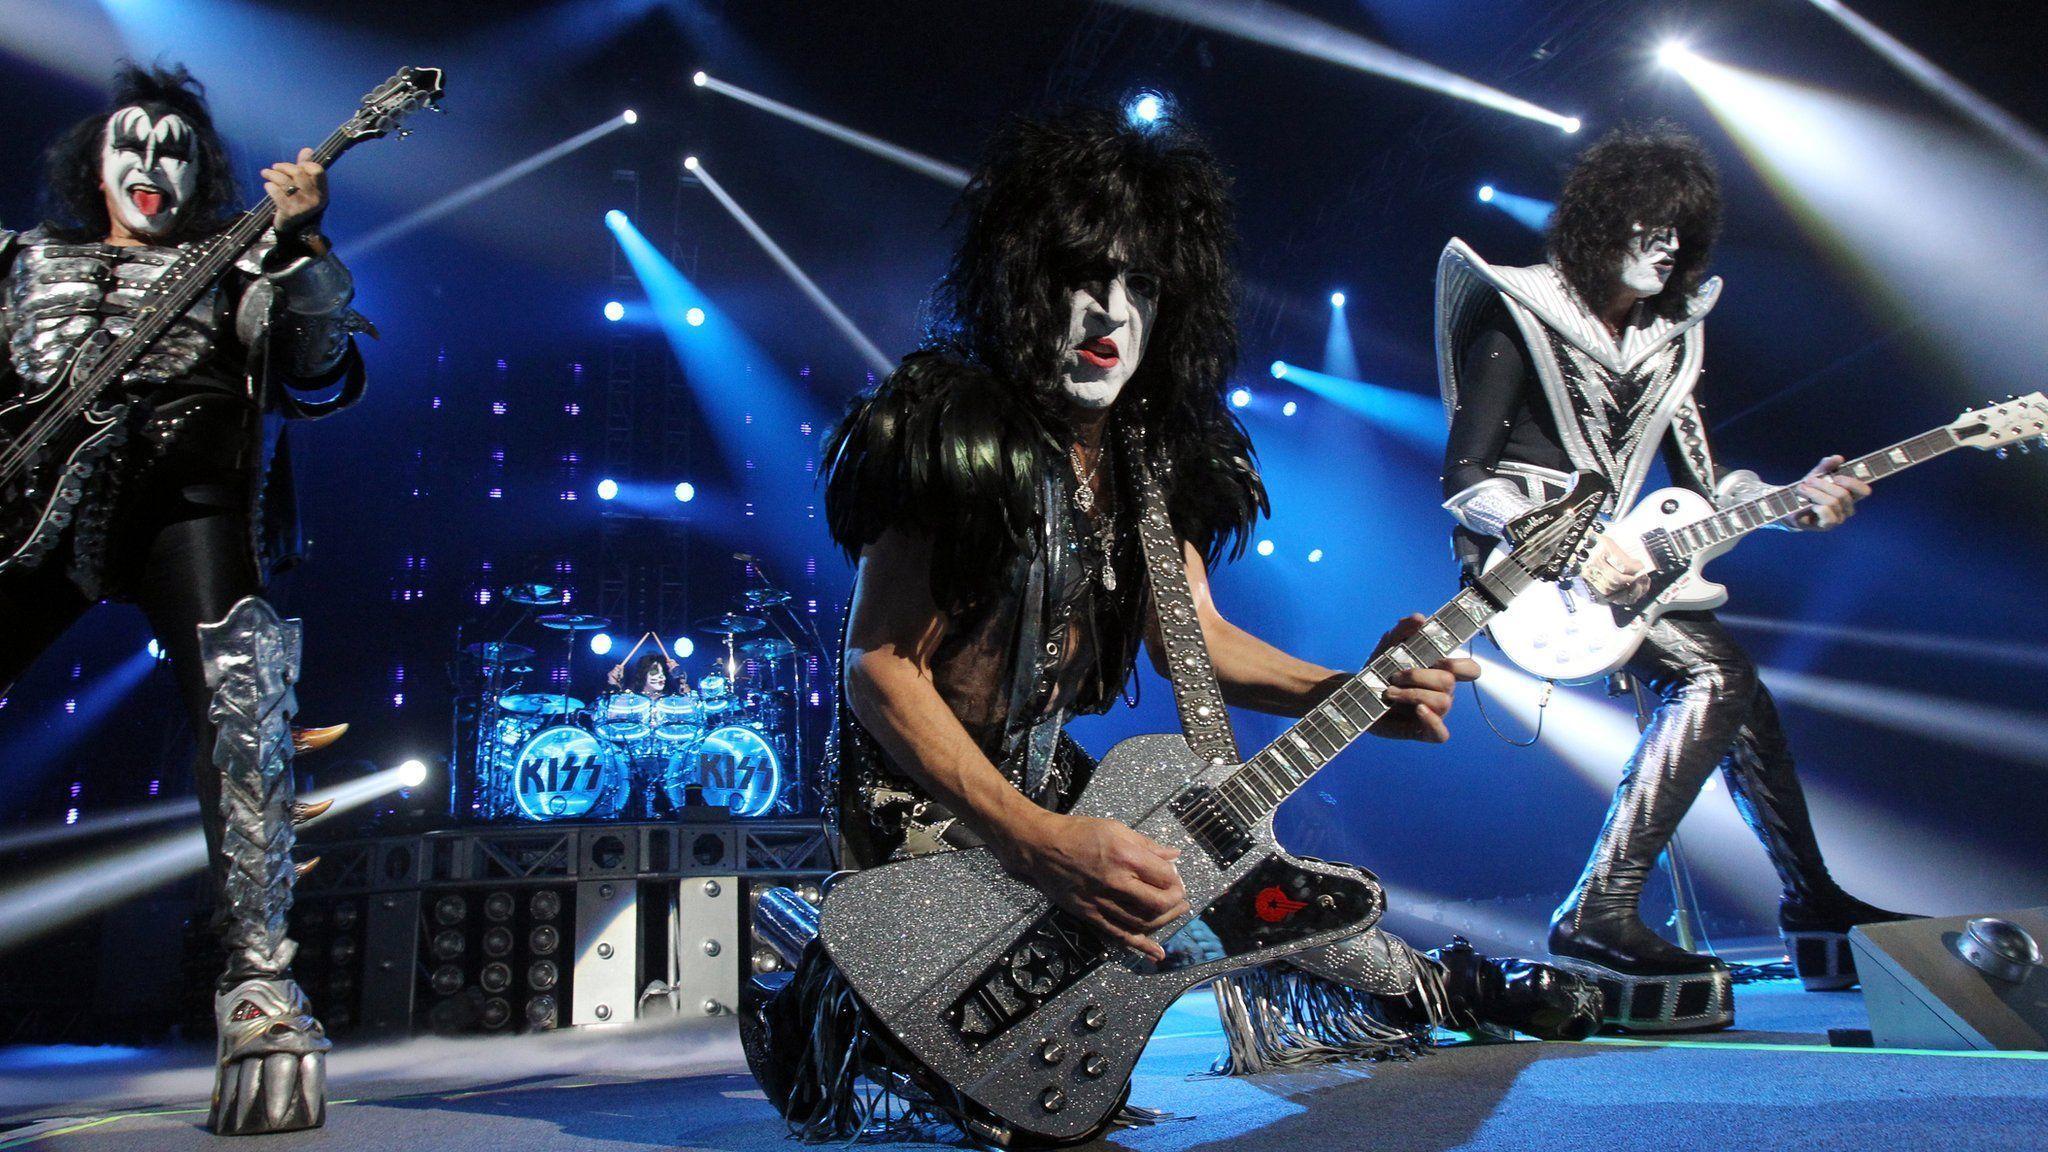 Kiss to close Download 2015